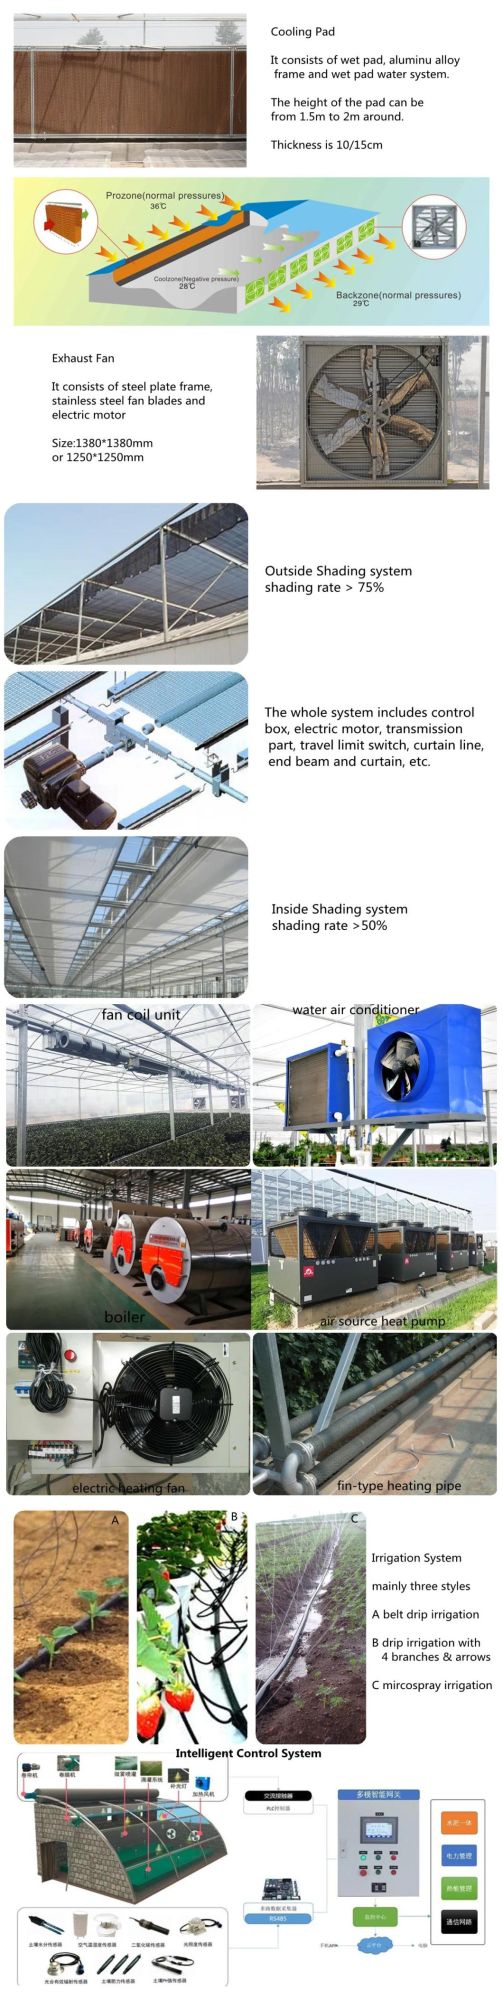 Seedling Machine Unit with Dibbler/Seeder/Covering& Watering Station for Automatic Seedling Process for Agriculture/Greenhouse